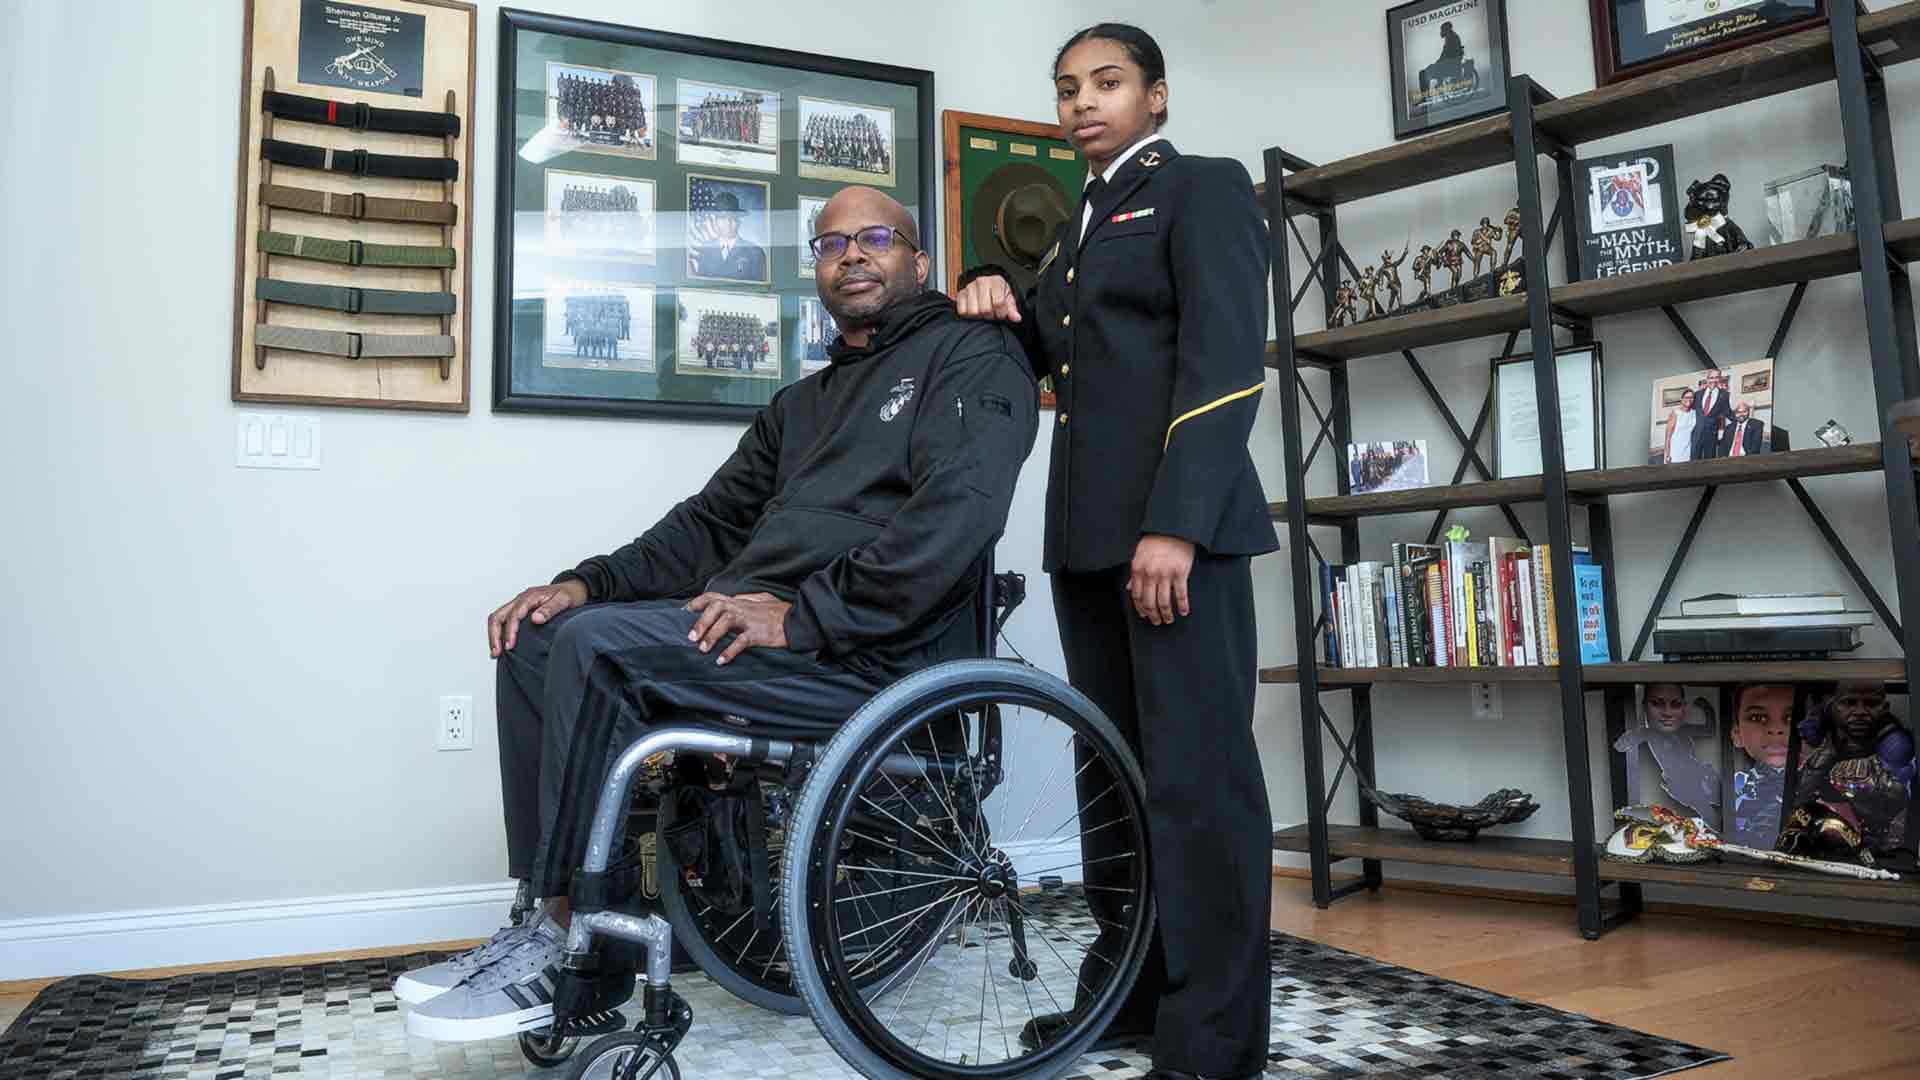 US Naval Academy Midshipman Kaylah Gillums stands in uniform behind her father, who is seated in his wheelchair.